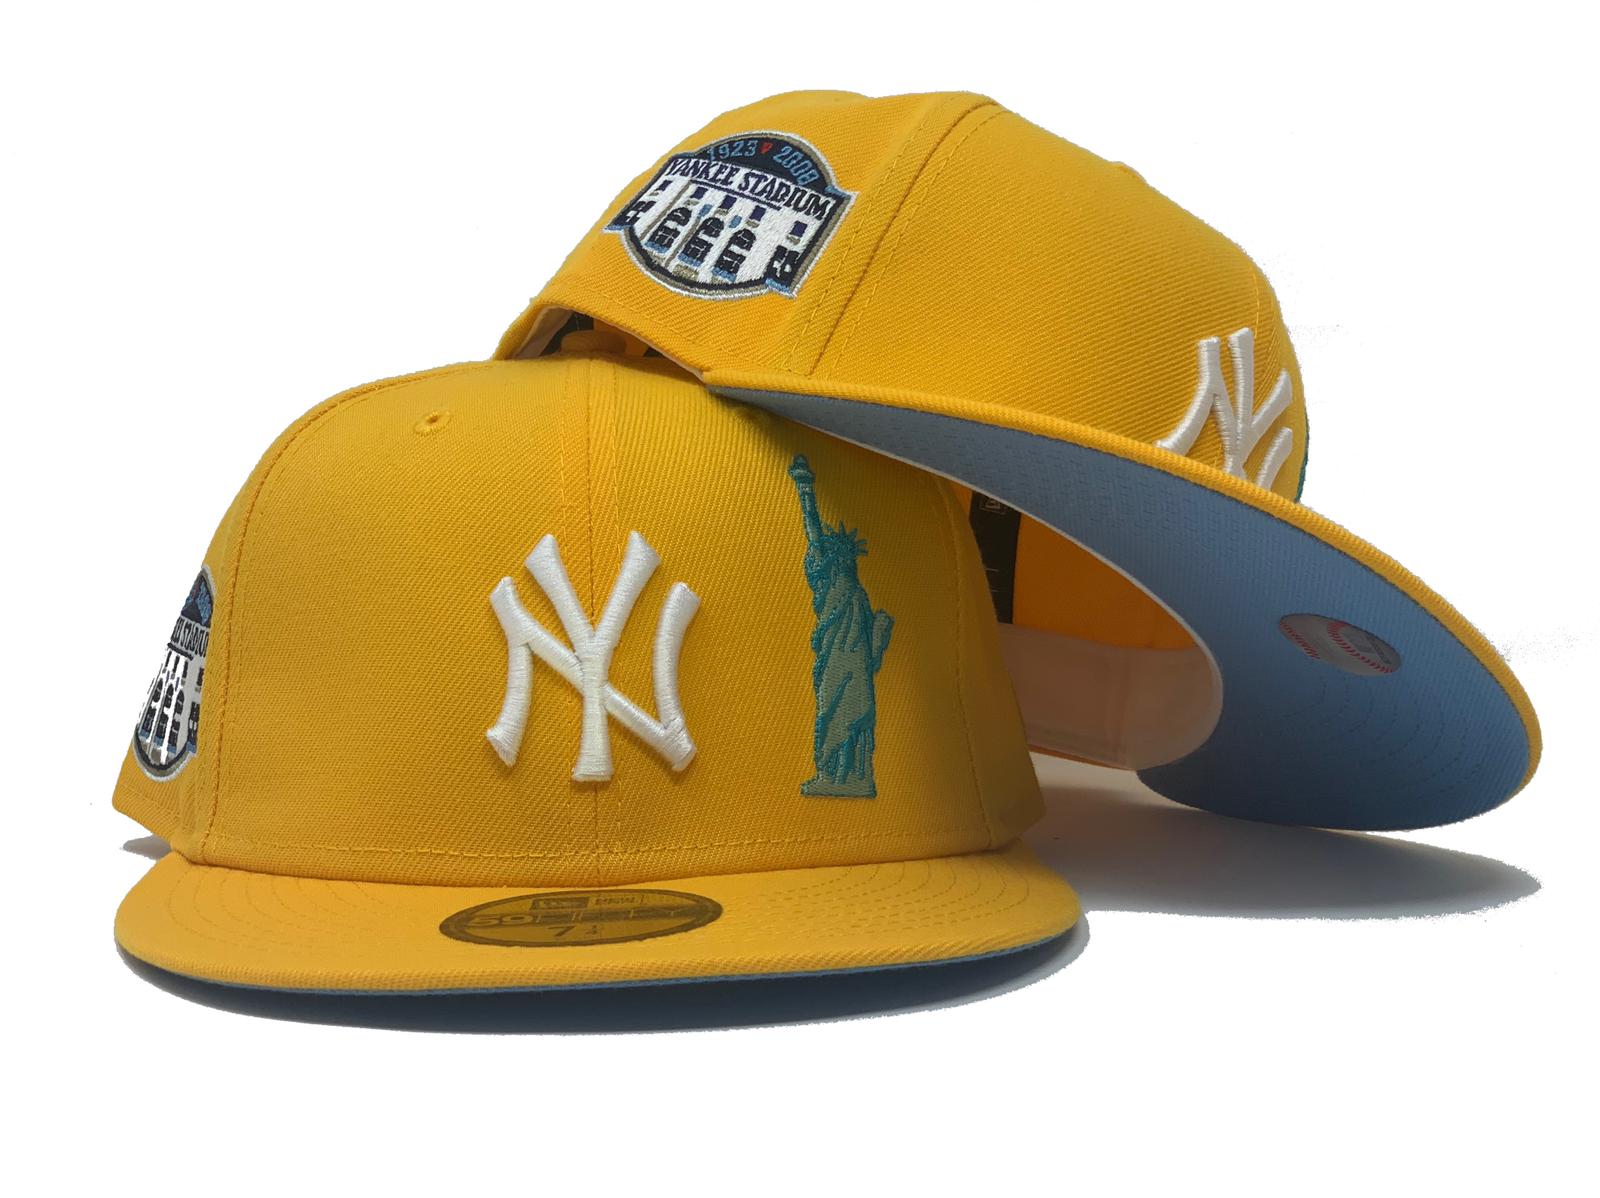 the new york hat